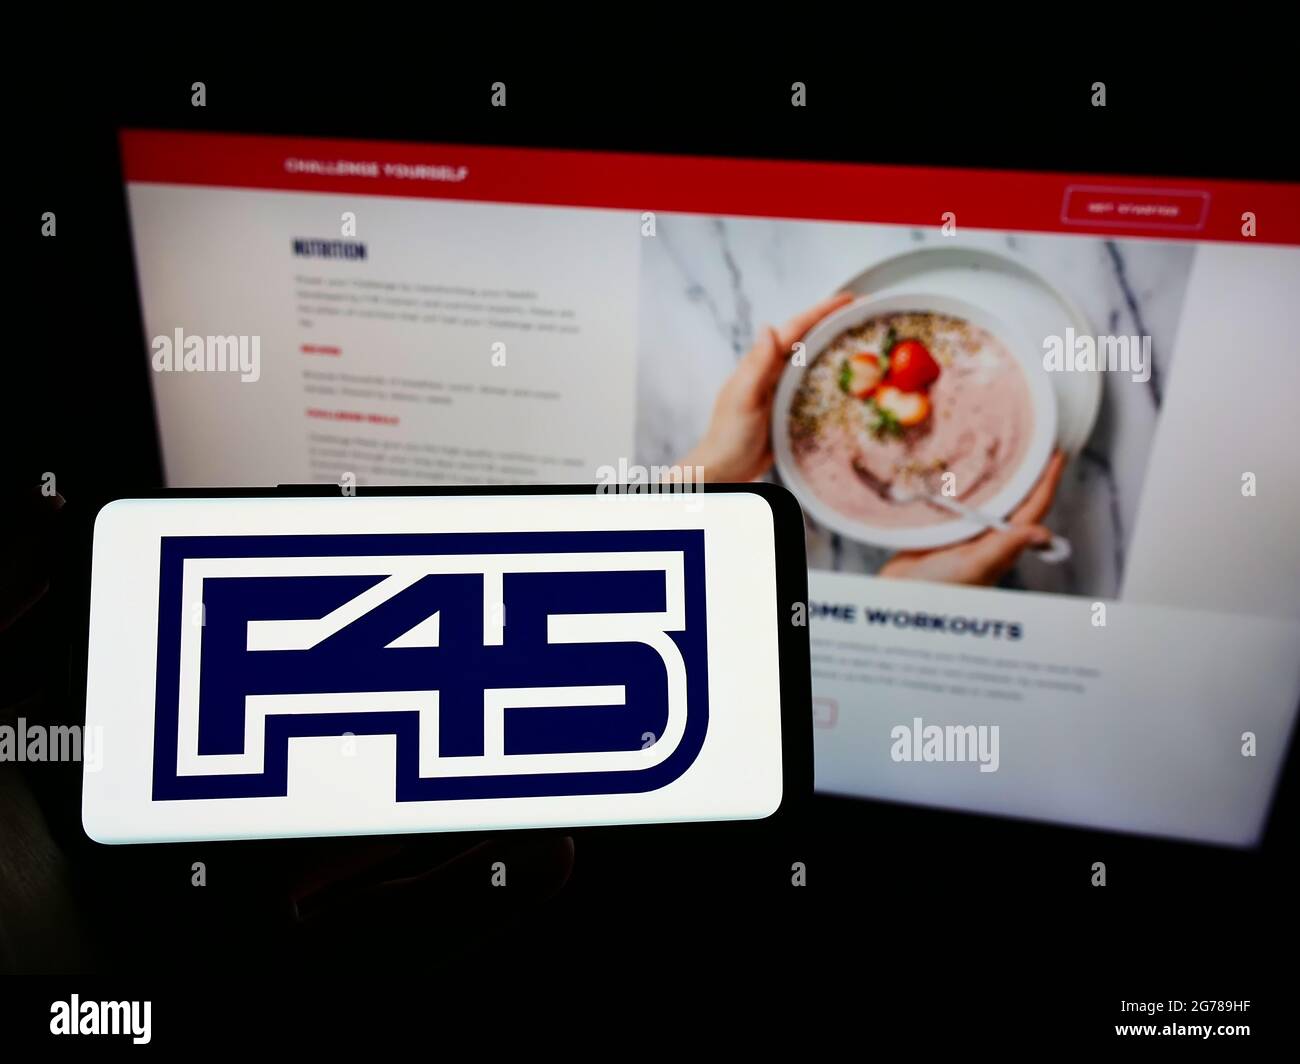 Person holding mobile phone with logo of fitness company F45 Training Holdings Inc. on screen in front of web page. Focus on phone display. Stock Photo